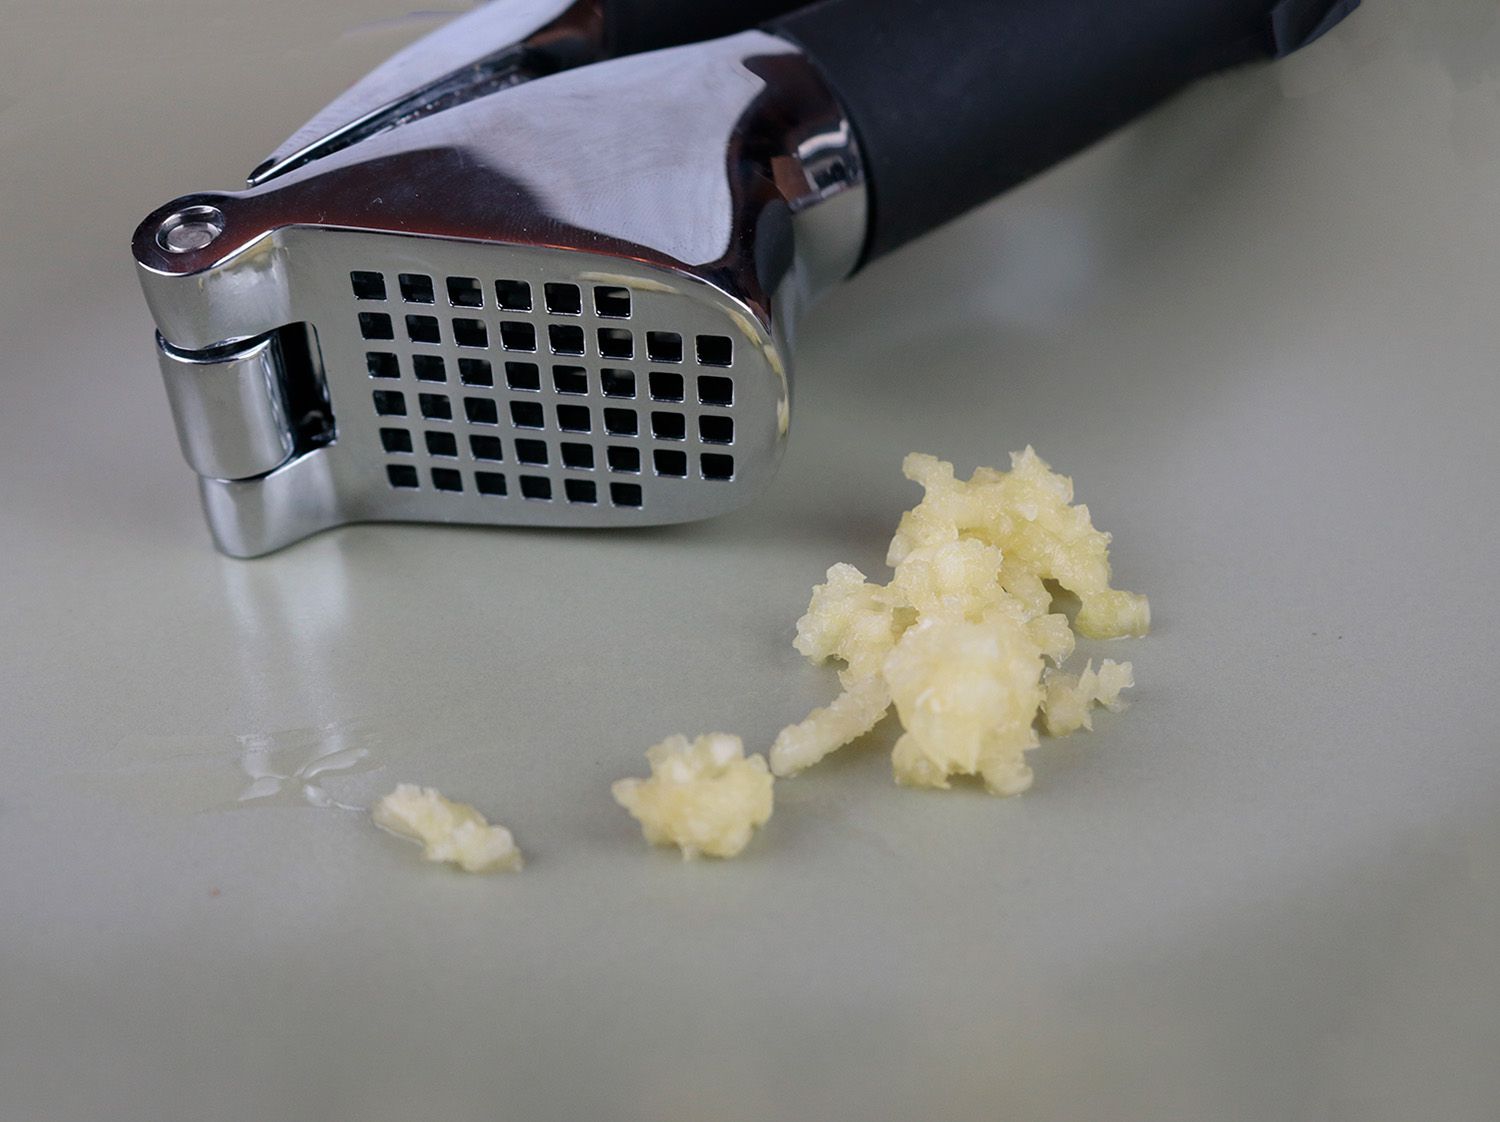 a close up of the screen of a garlic press next to a pile of minced garlic